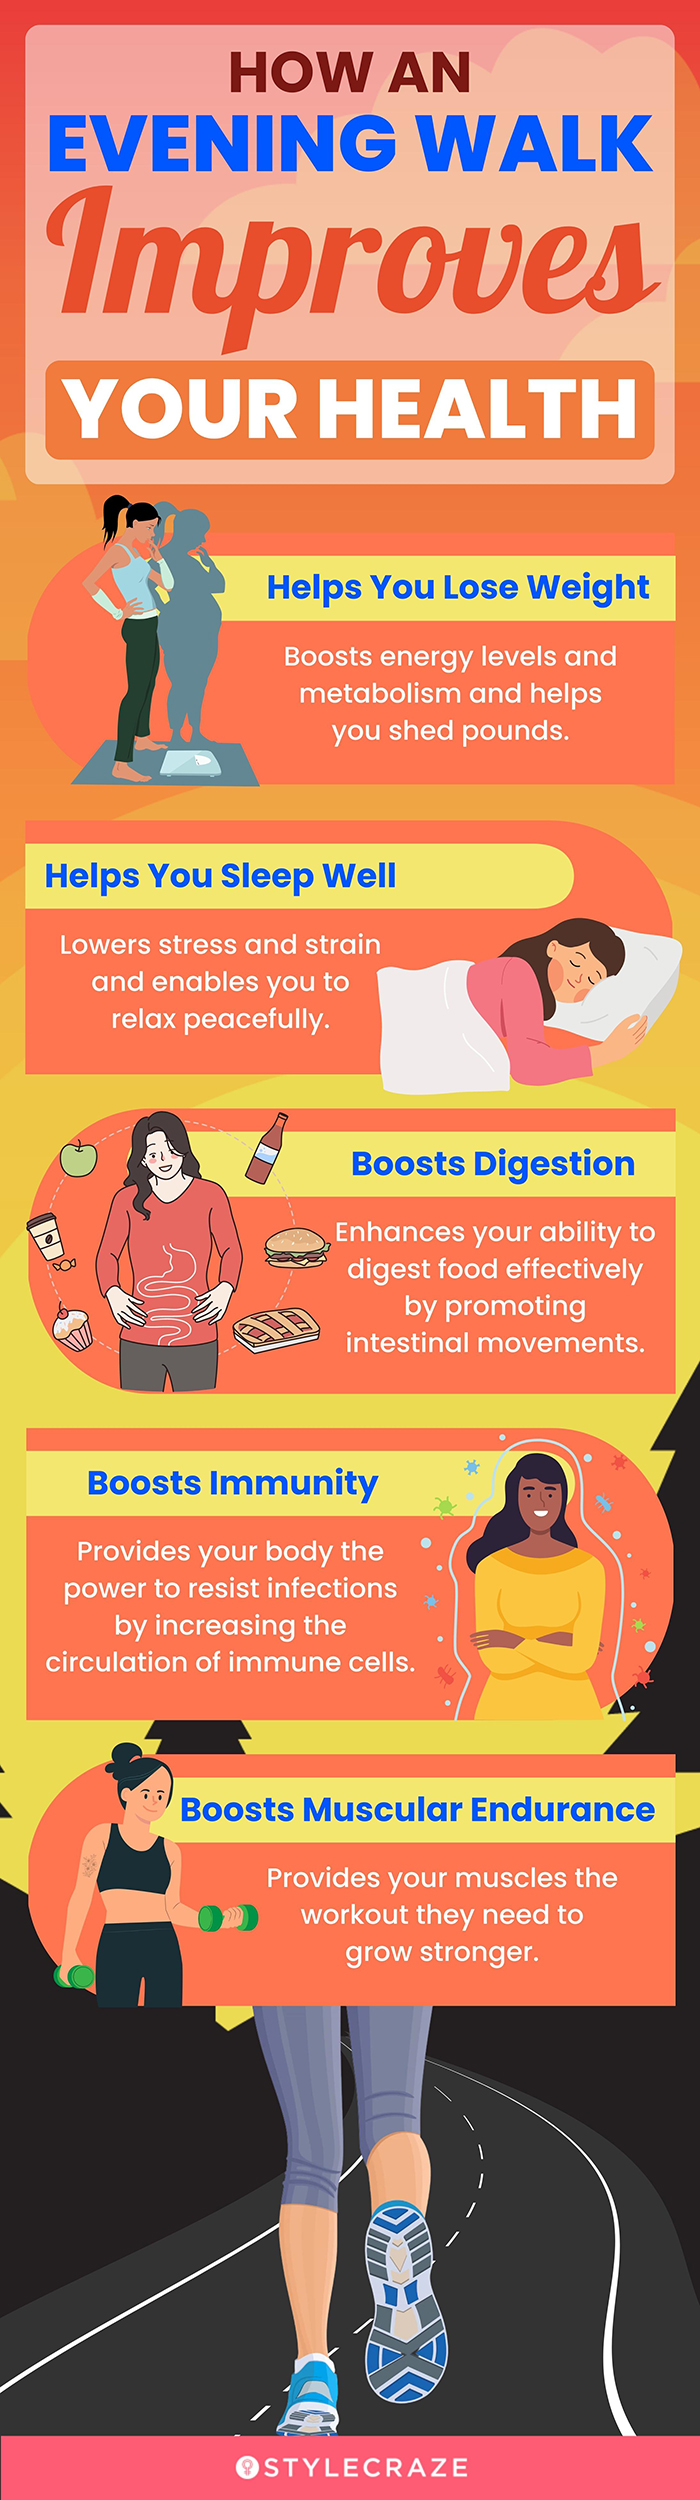 how an evening walk improves your health (infographic)